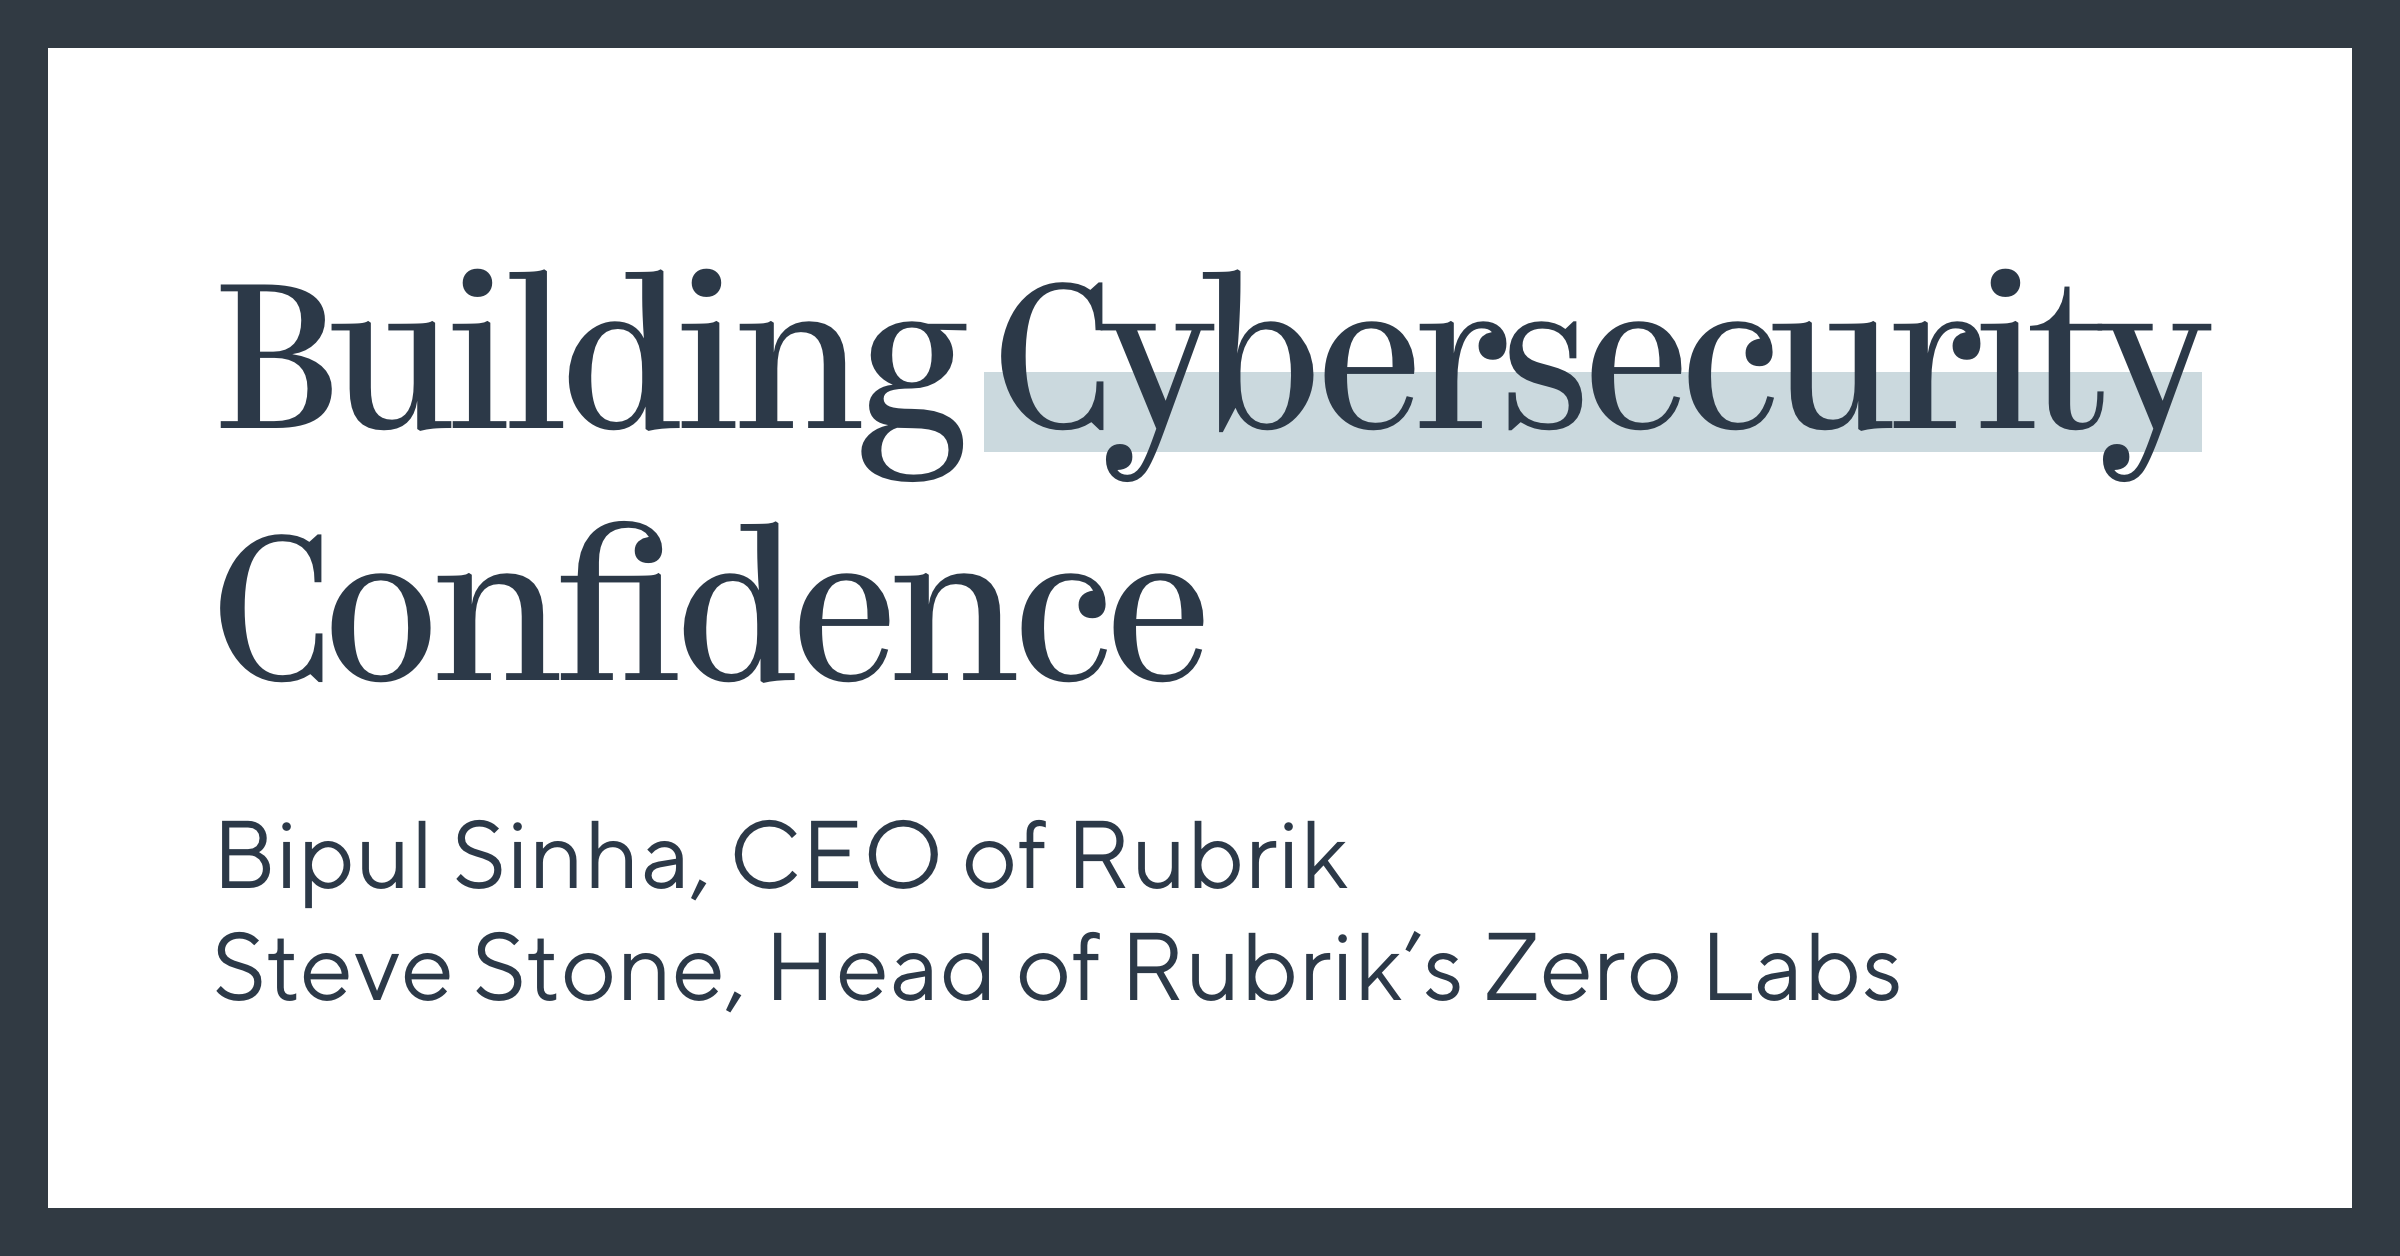 Building Cybersecurity Confidence